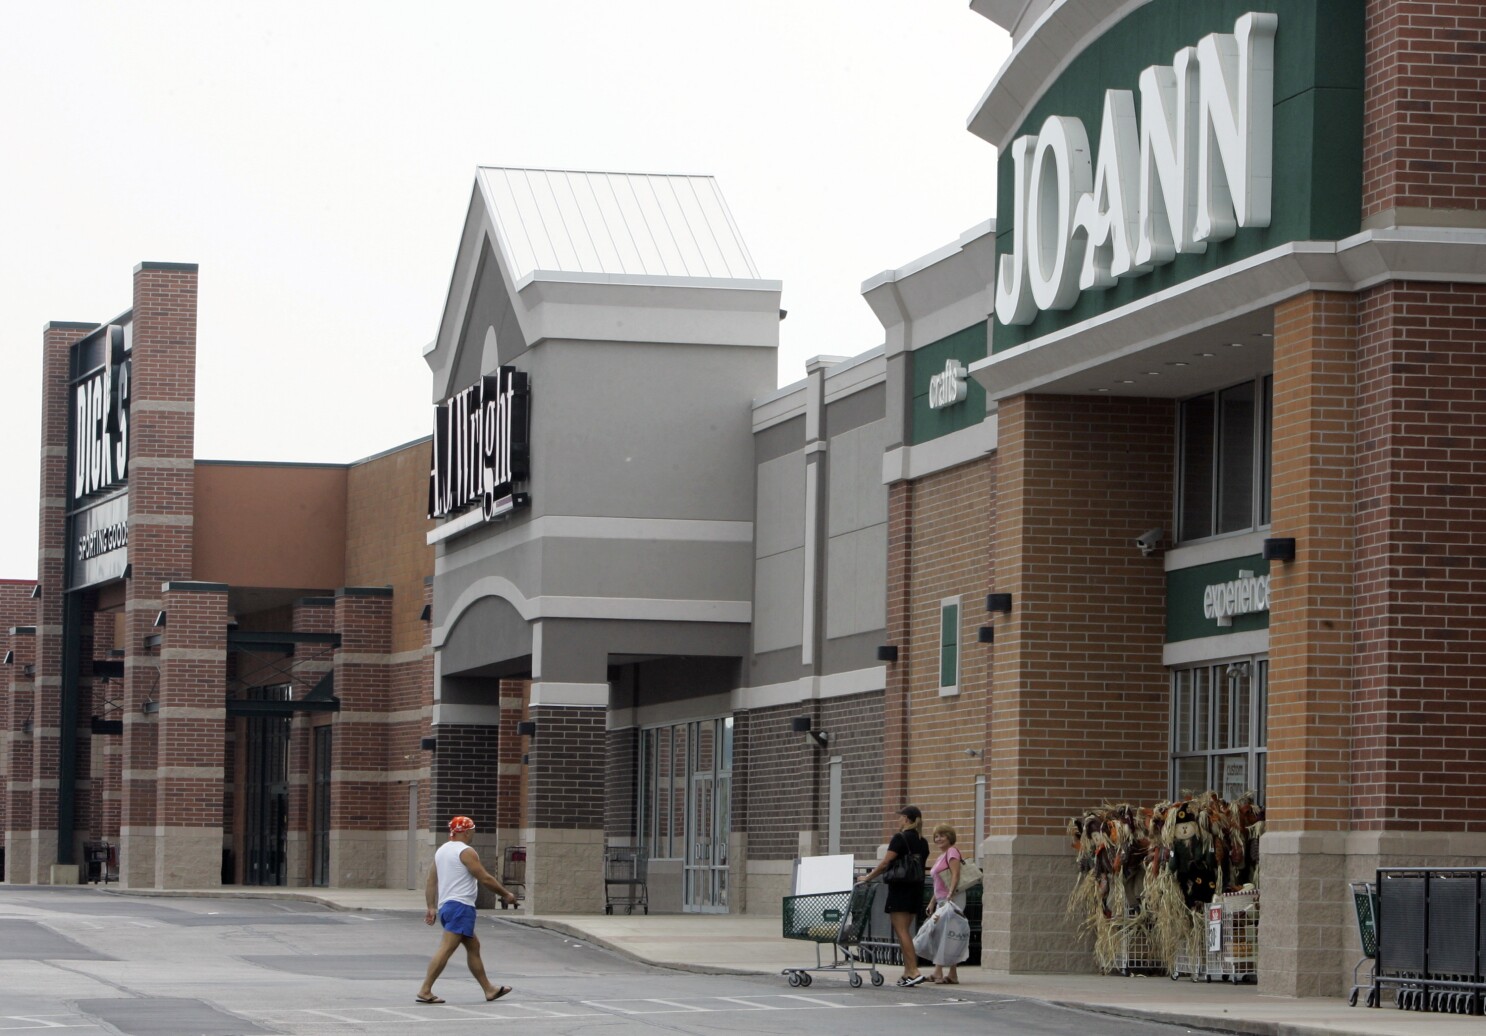 Joann files for bankruptcy as pandemic-era crafting declines